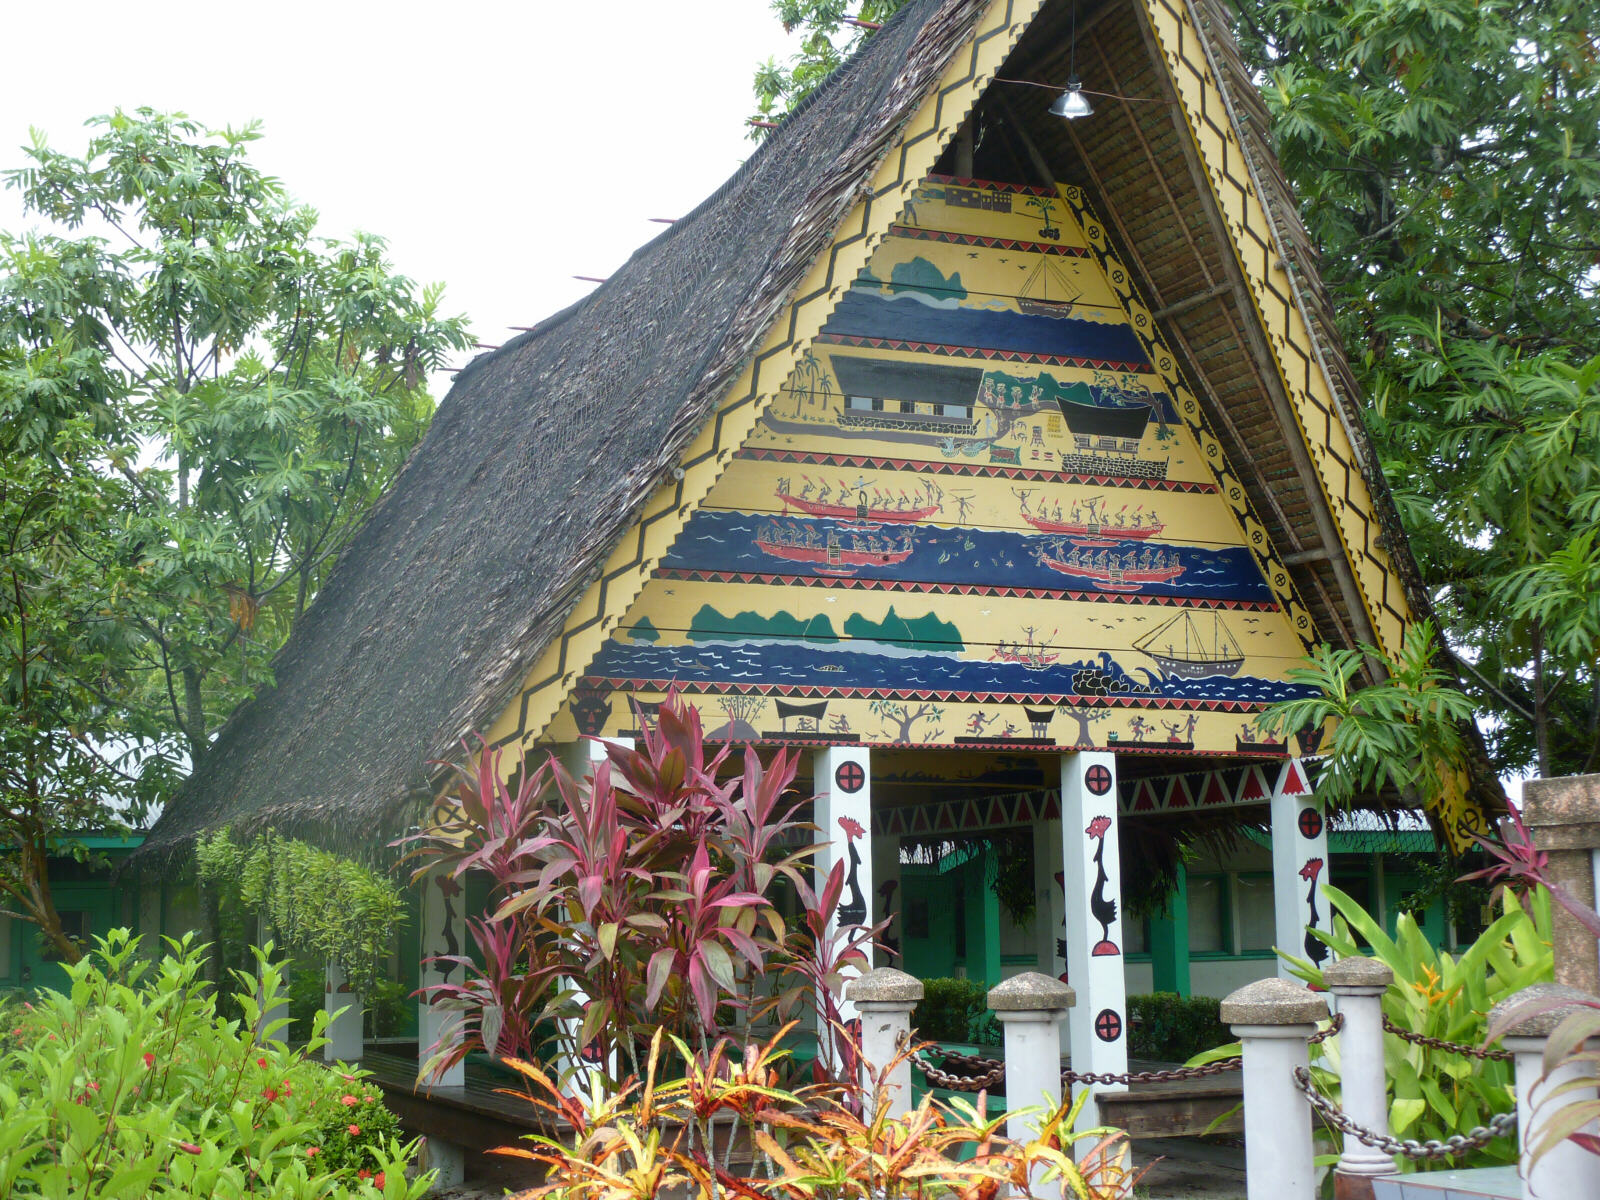 Traditional meeting house in Koror, Palau